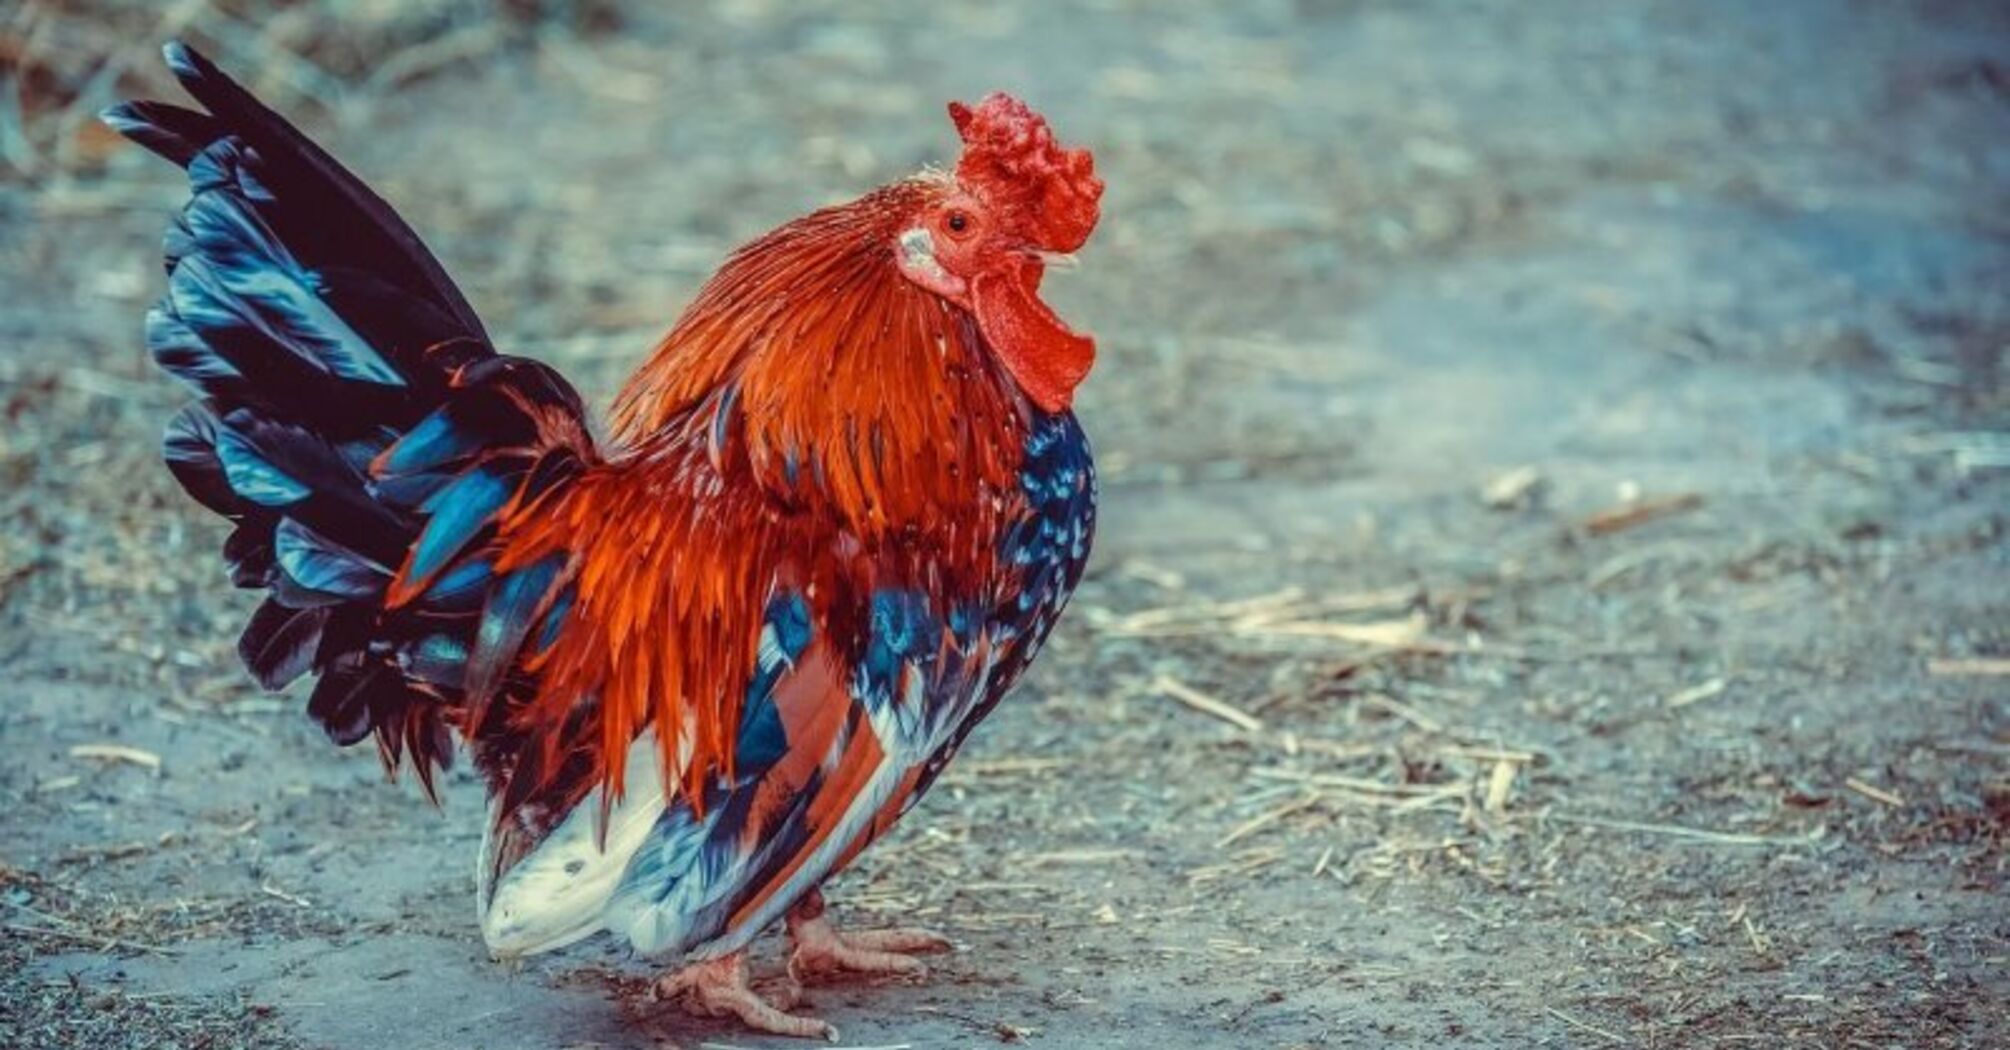 Canadian chicken sets World record for identifying letters, numbers, and colors